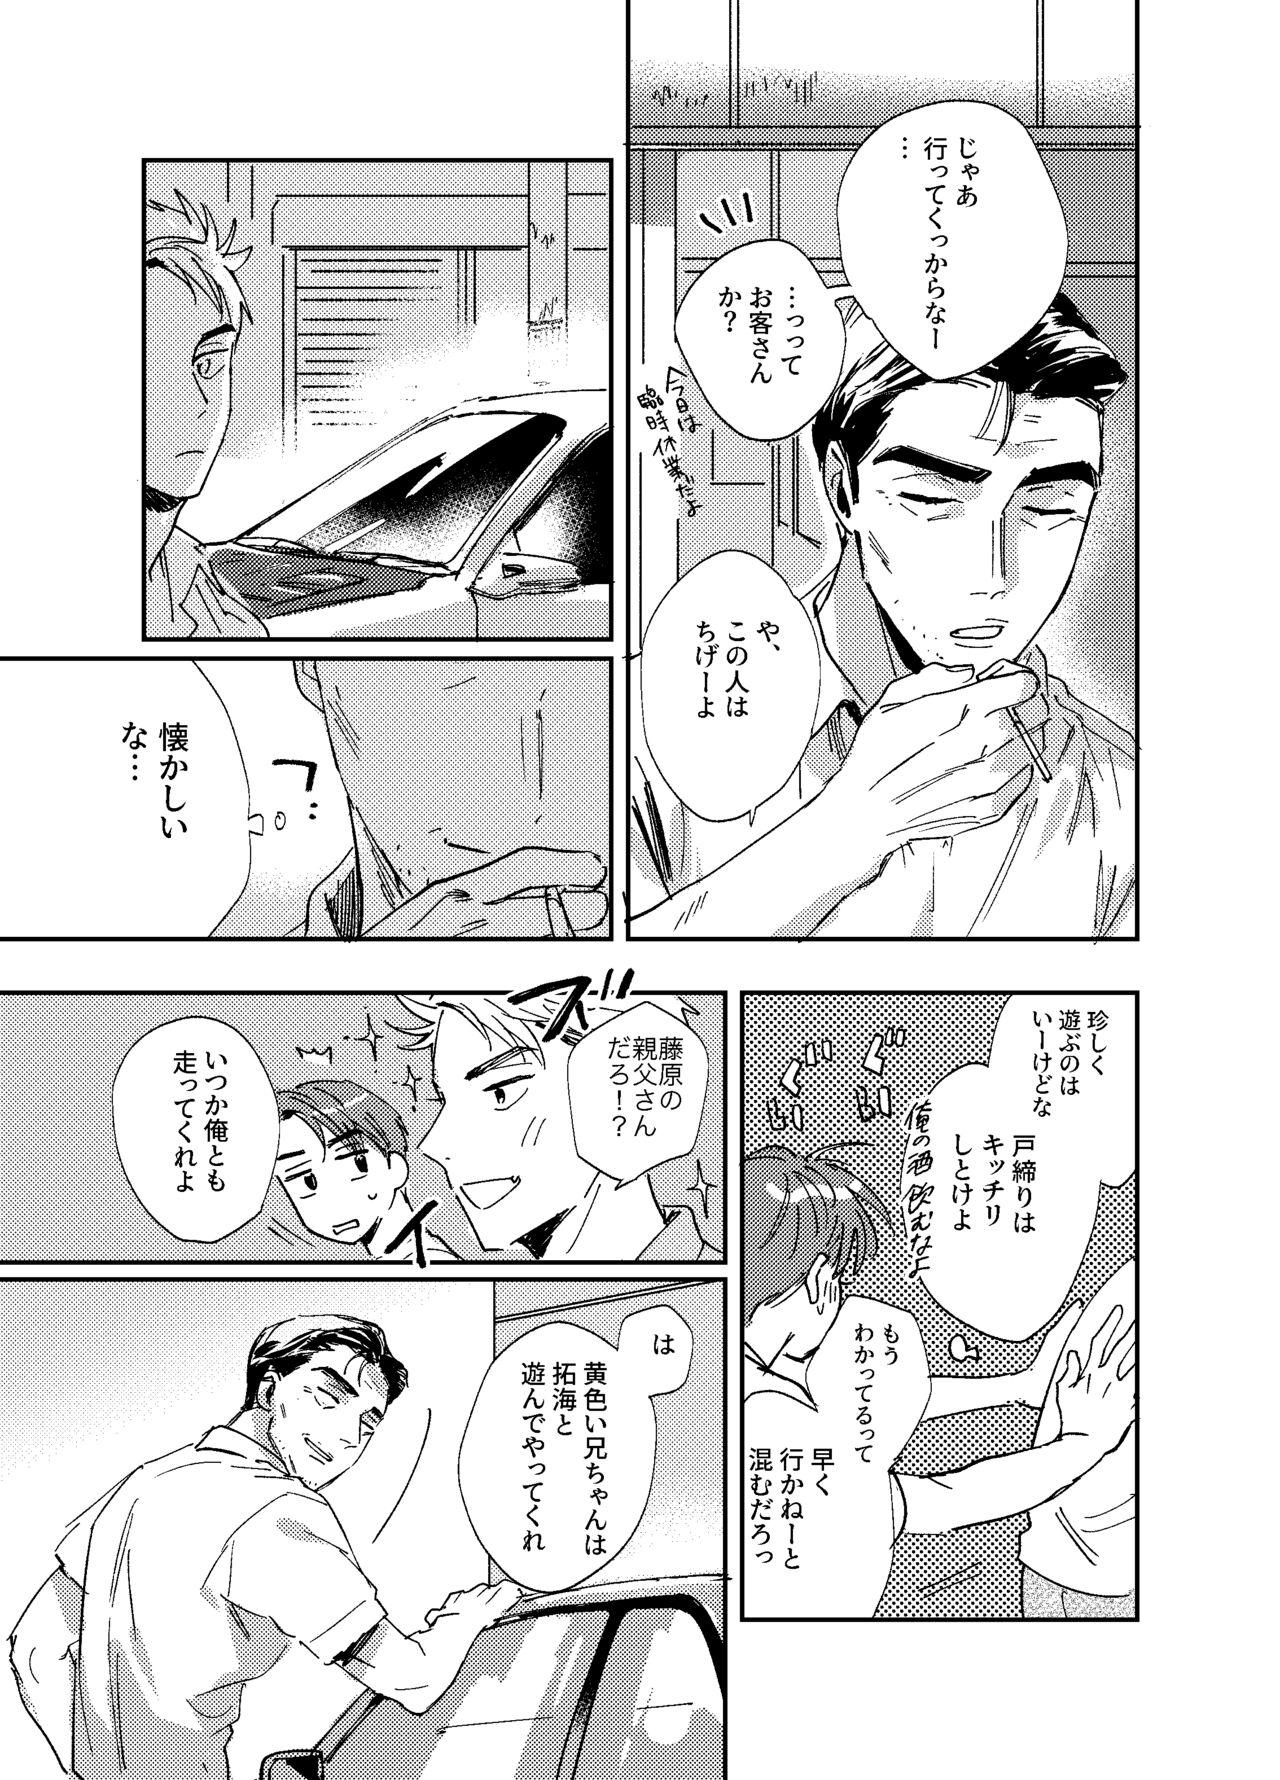 Spank more than stars, more than you. - Initial d Teen Blowjob - Page 8